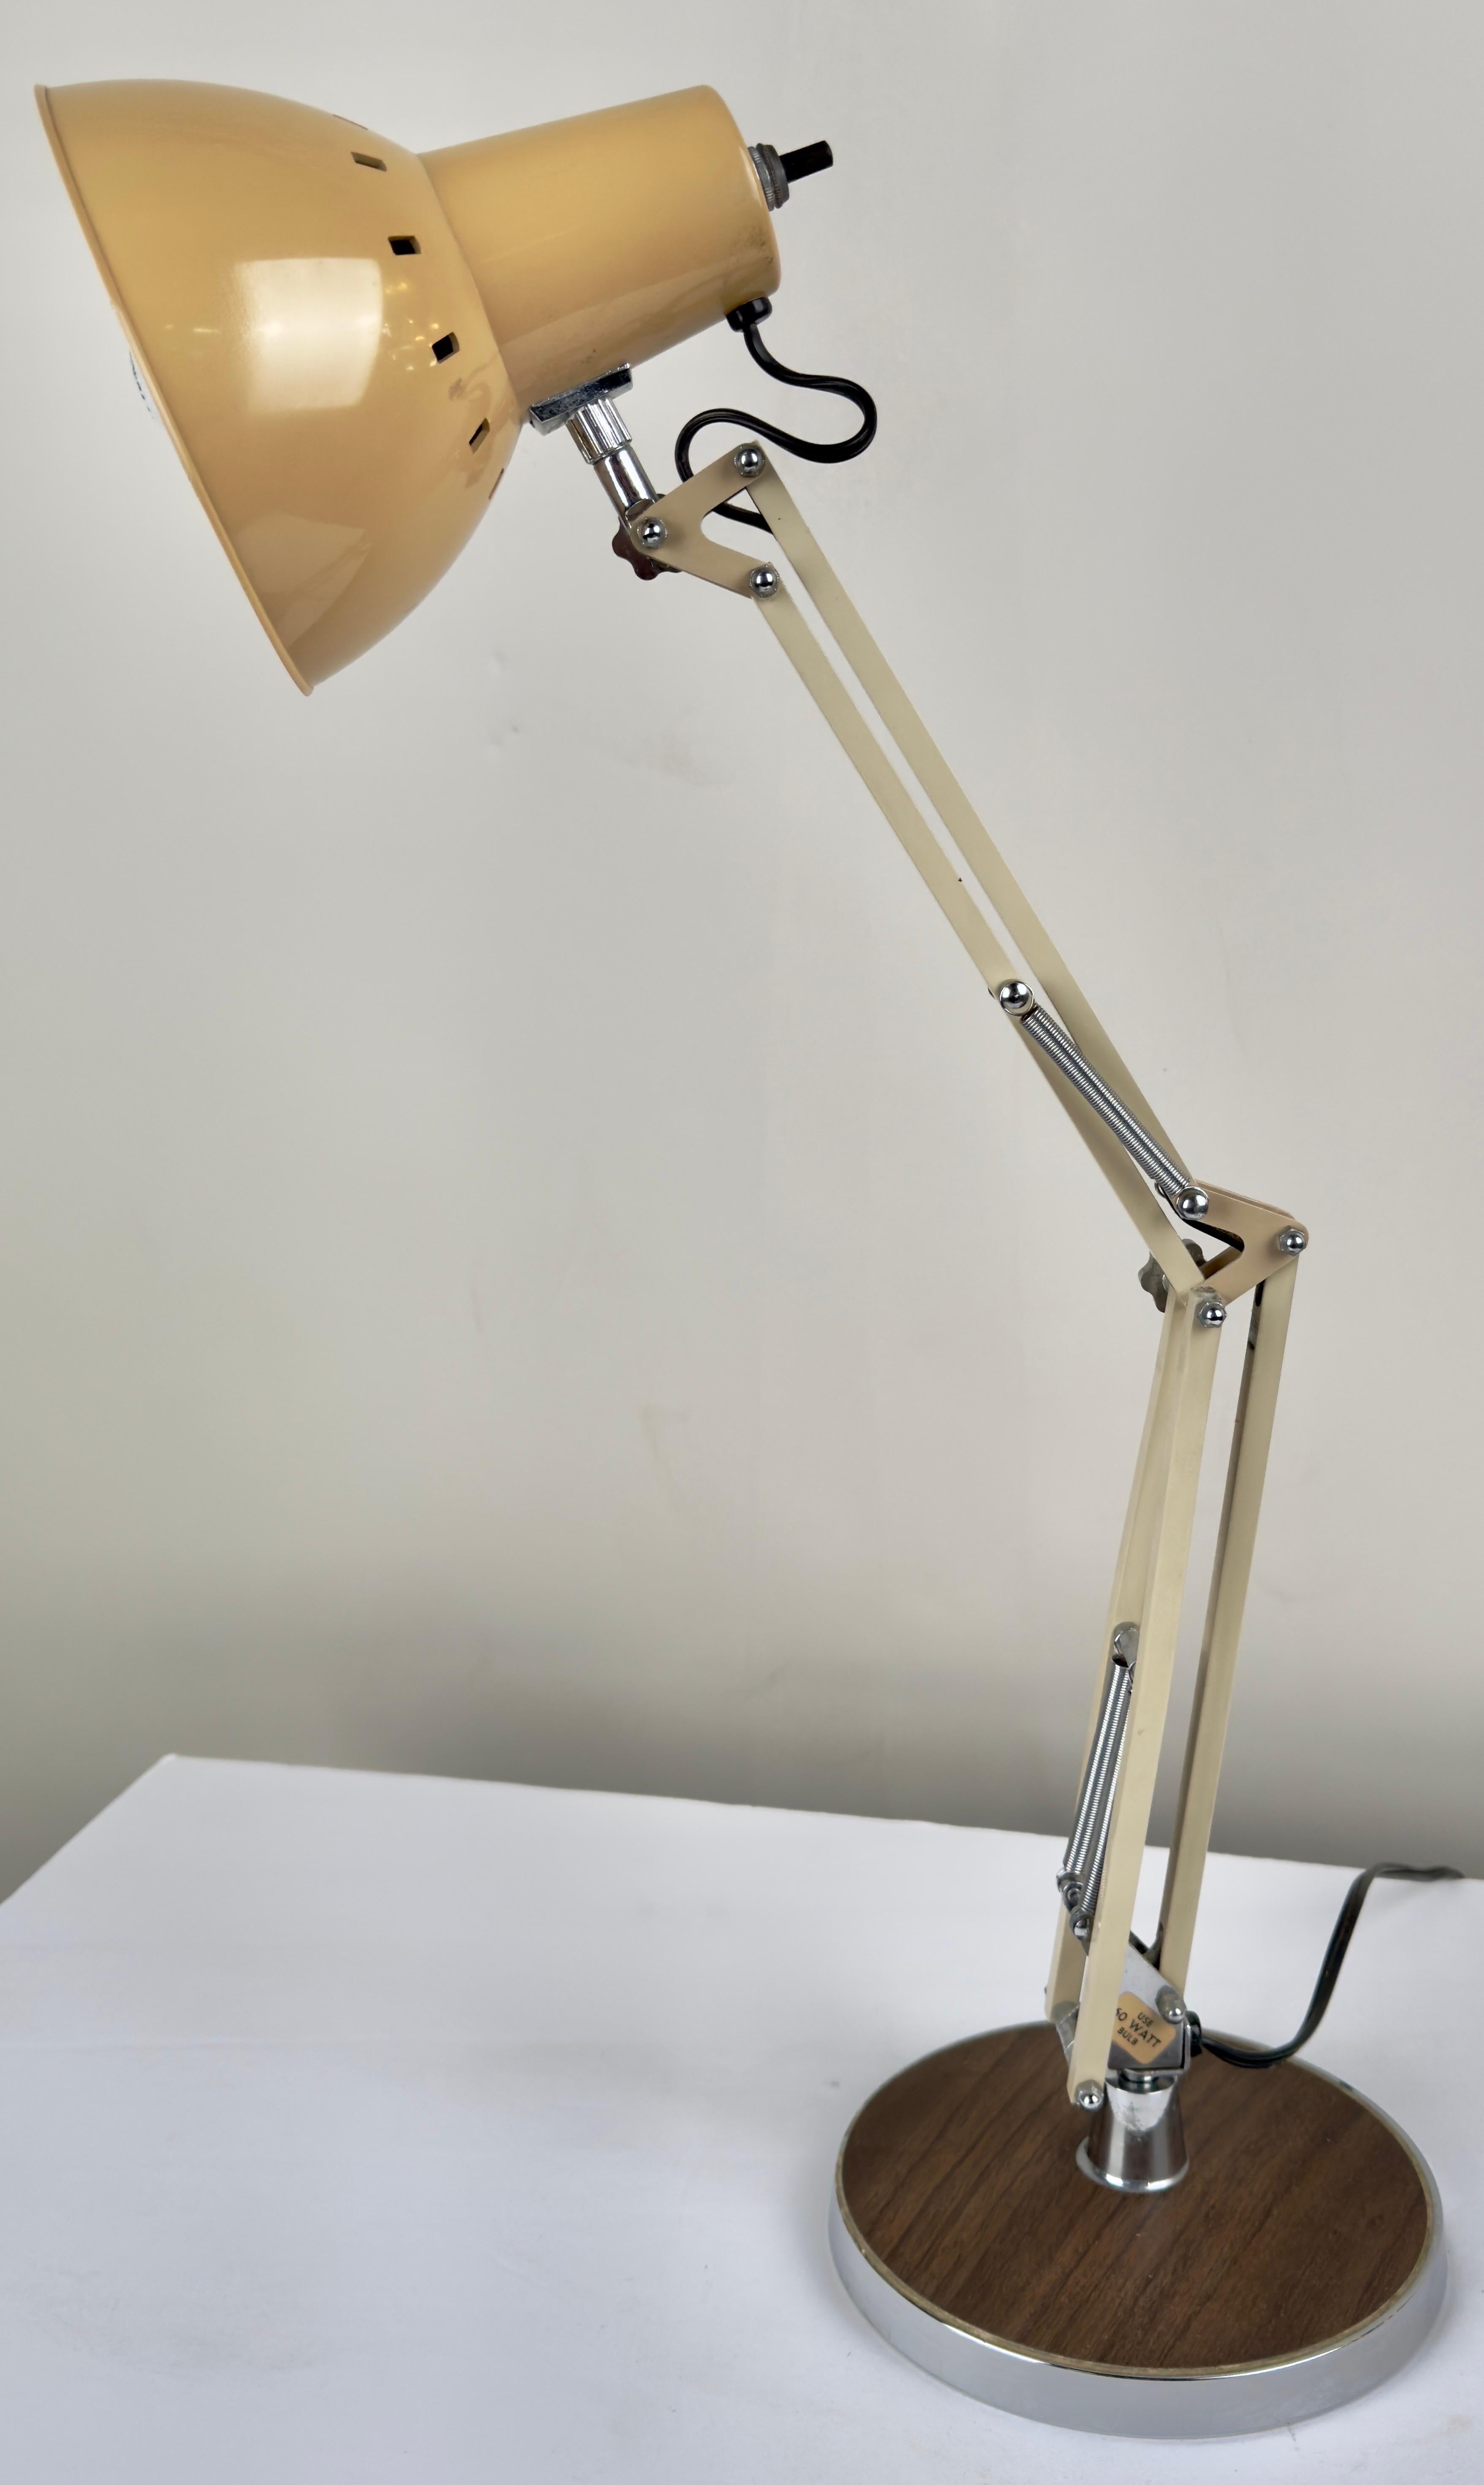 A Post Modern Articulating Architects Drafting Lamp in Tan, crafted by Electrix, Inc. Standing atop a round base adorned in a warm wood finish, this lamp boasts a sturdy metal construction delicately coated in a soothing tan hue. Its articulating